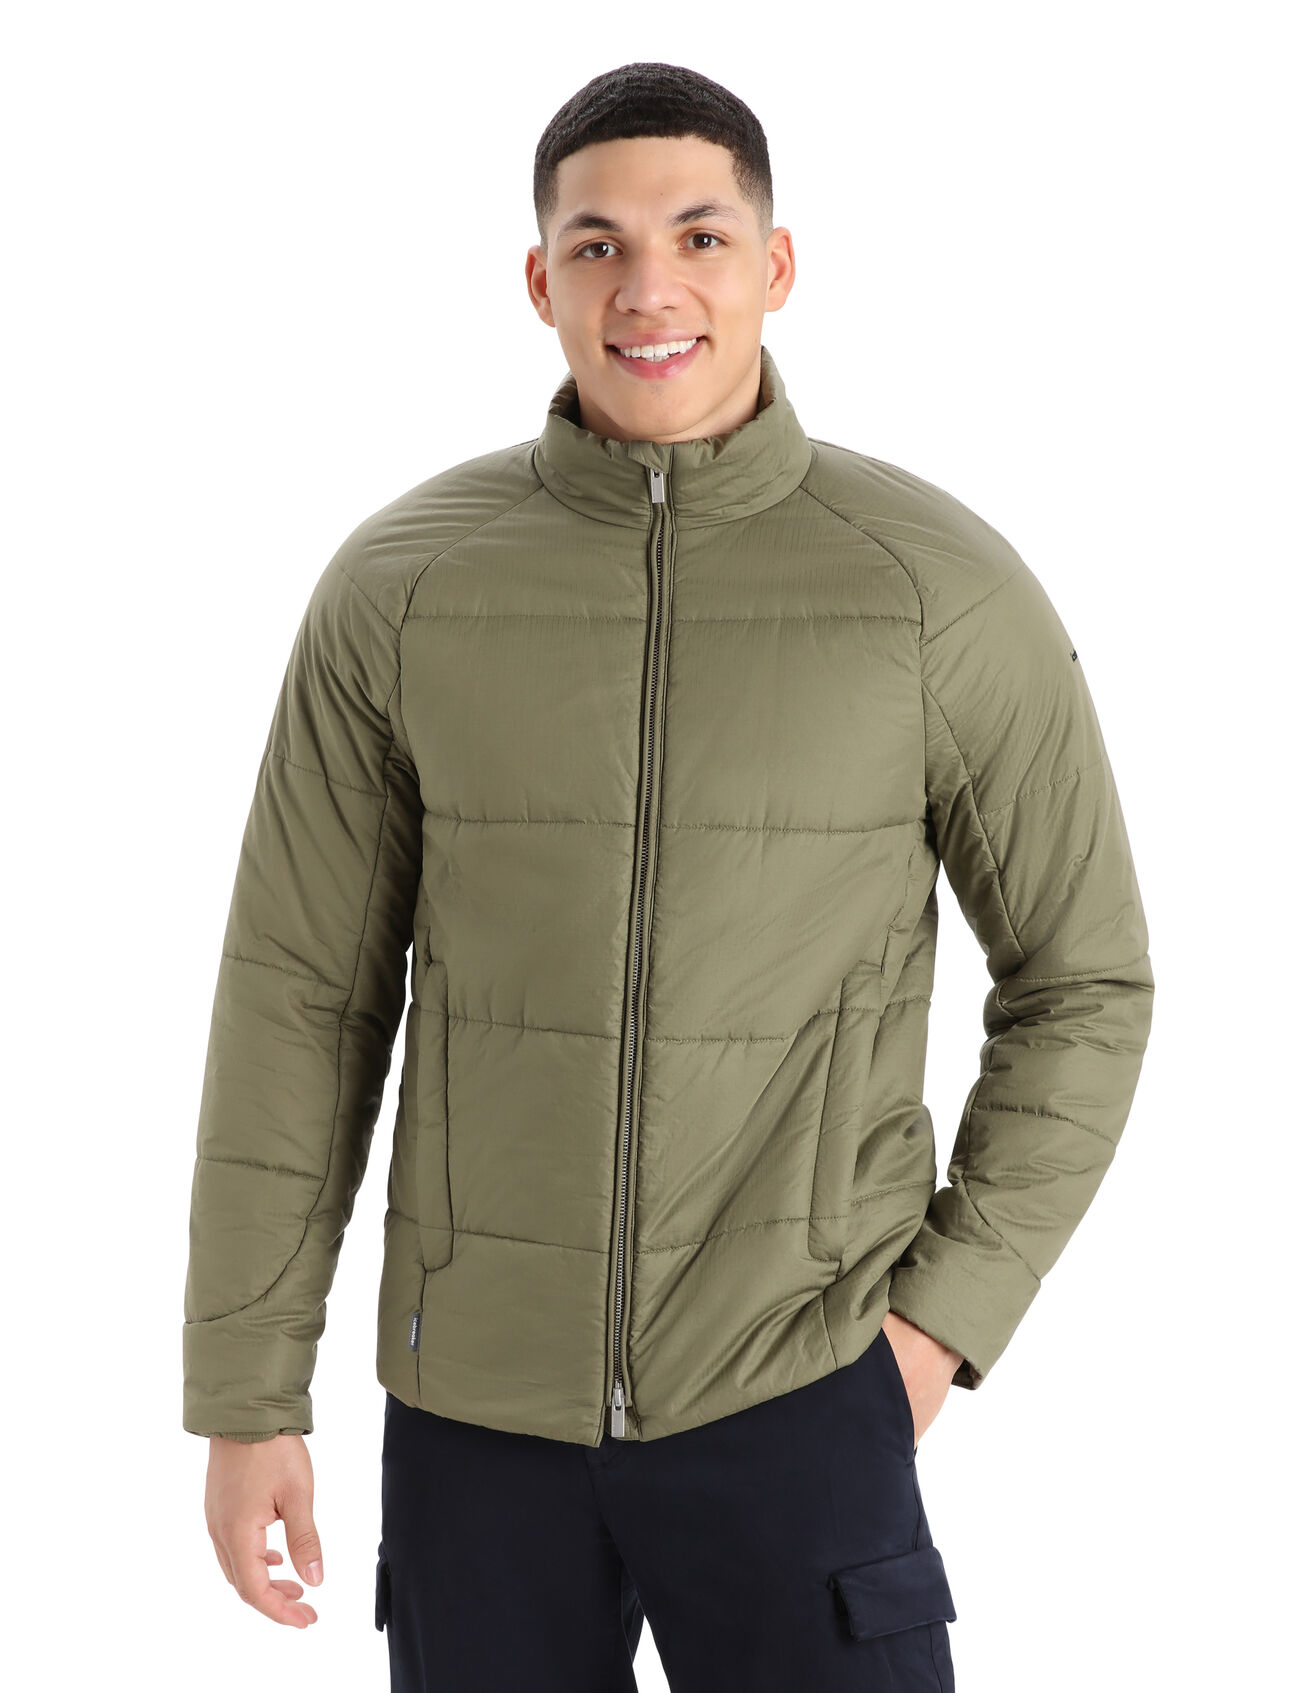 Mens MerinoLoft™ Collingwood II Jacket A stylish reimagining of the classic, everyday puffy jacket, the MerinoLoft™ Collingwood II Jacket features our innovative MerinoLoft™ insulation—a natural and cruelty-free insulation that harnesses the natural benefits of merino wool.